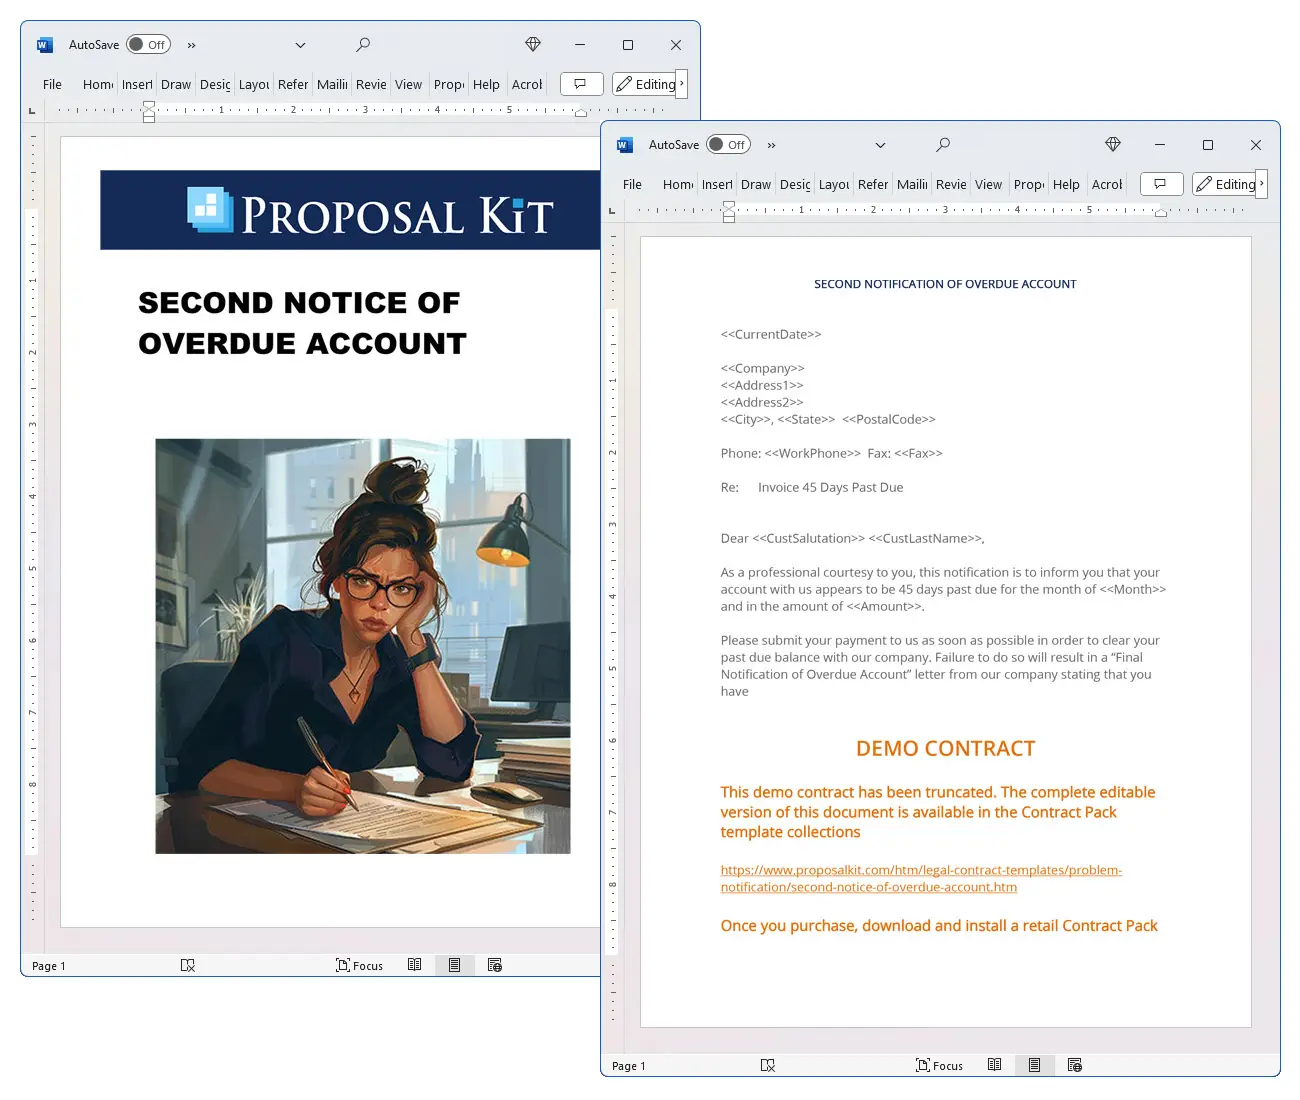 Second Notice of Overdue Account Concepts